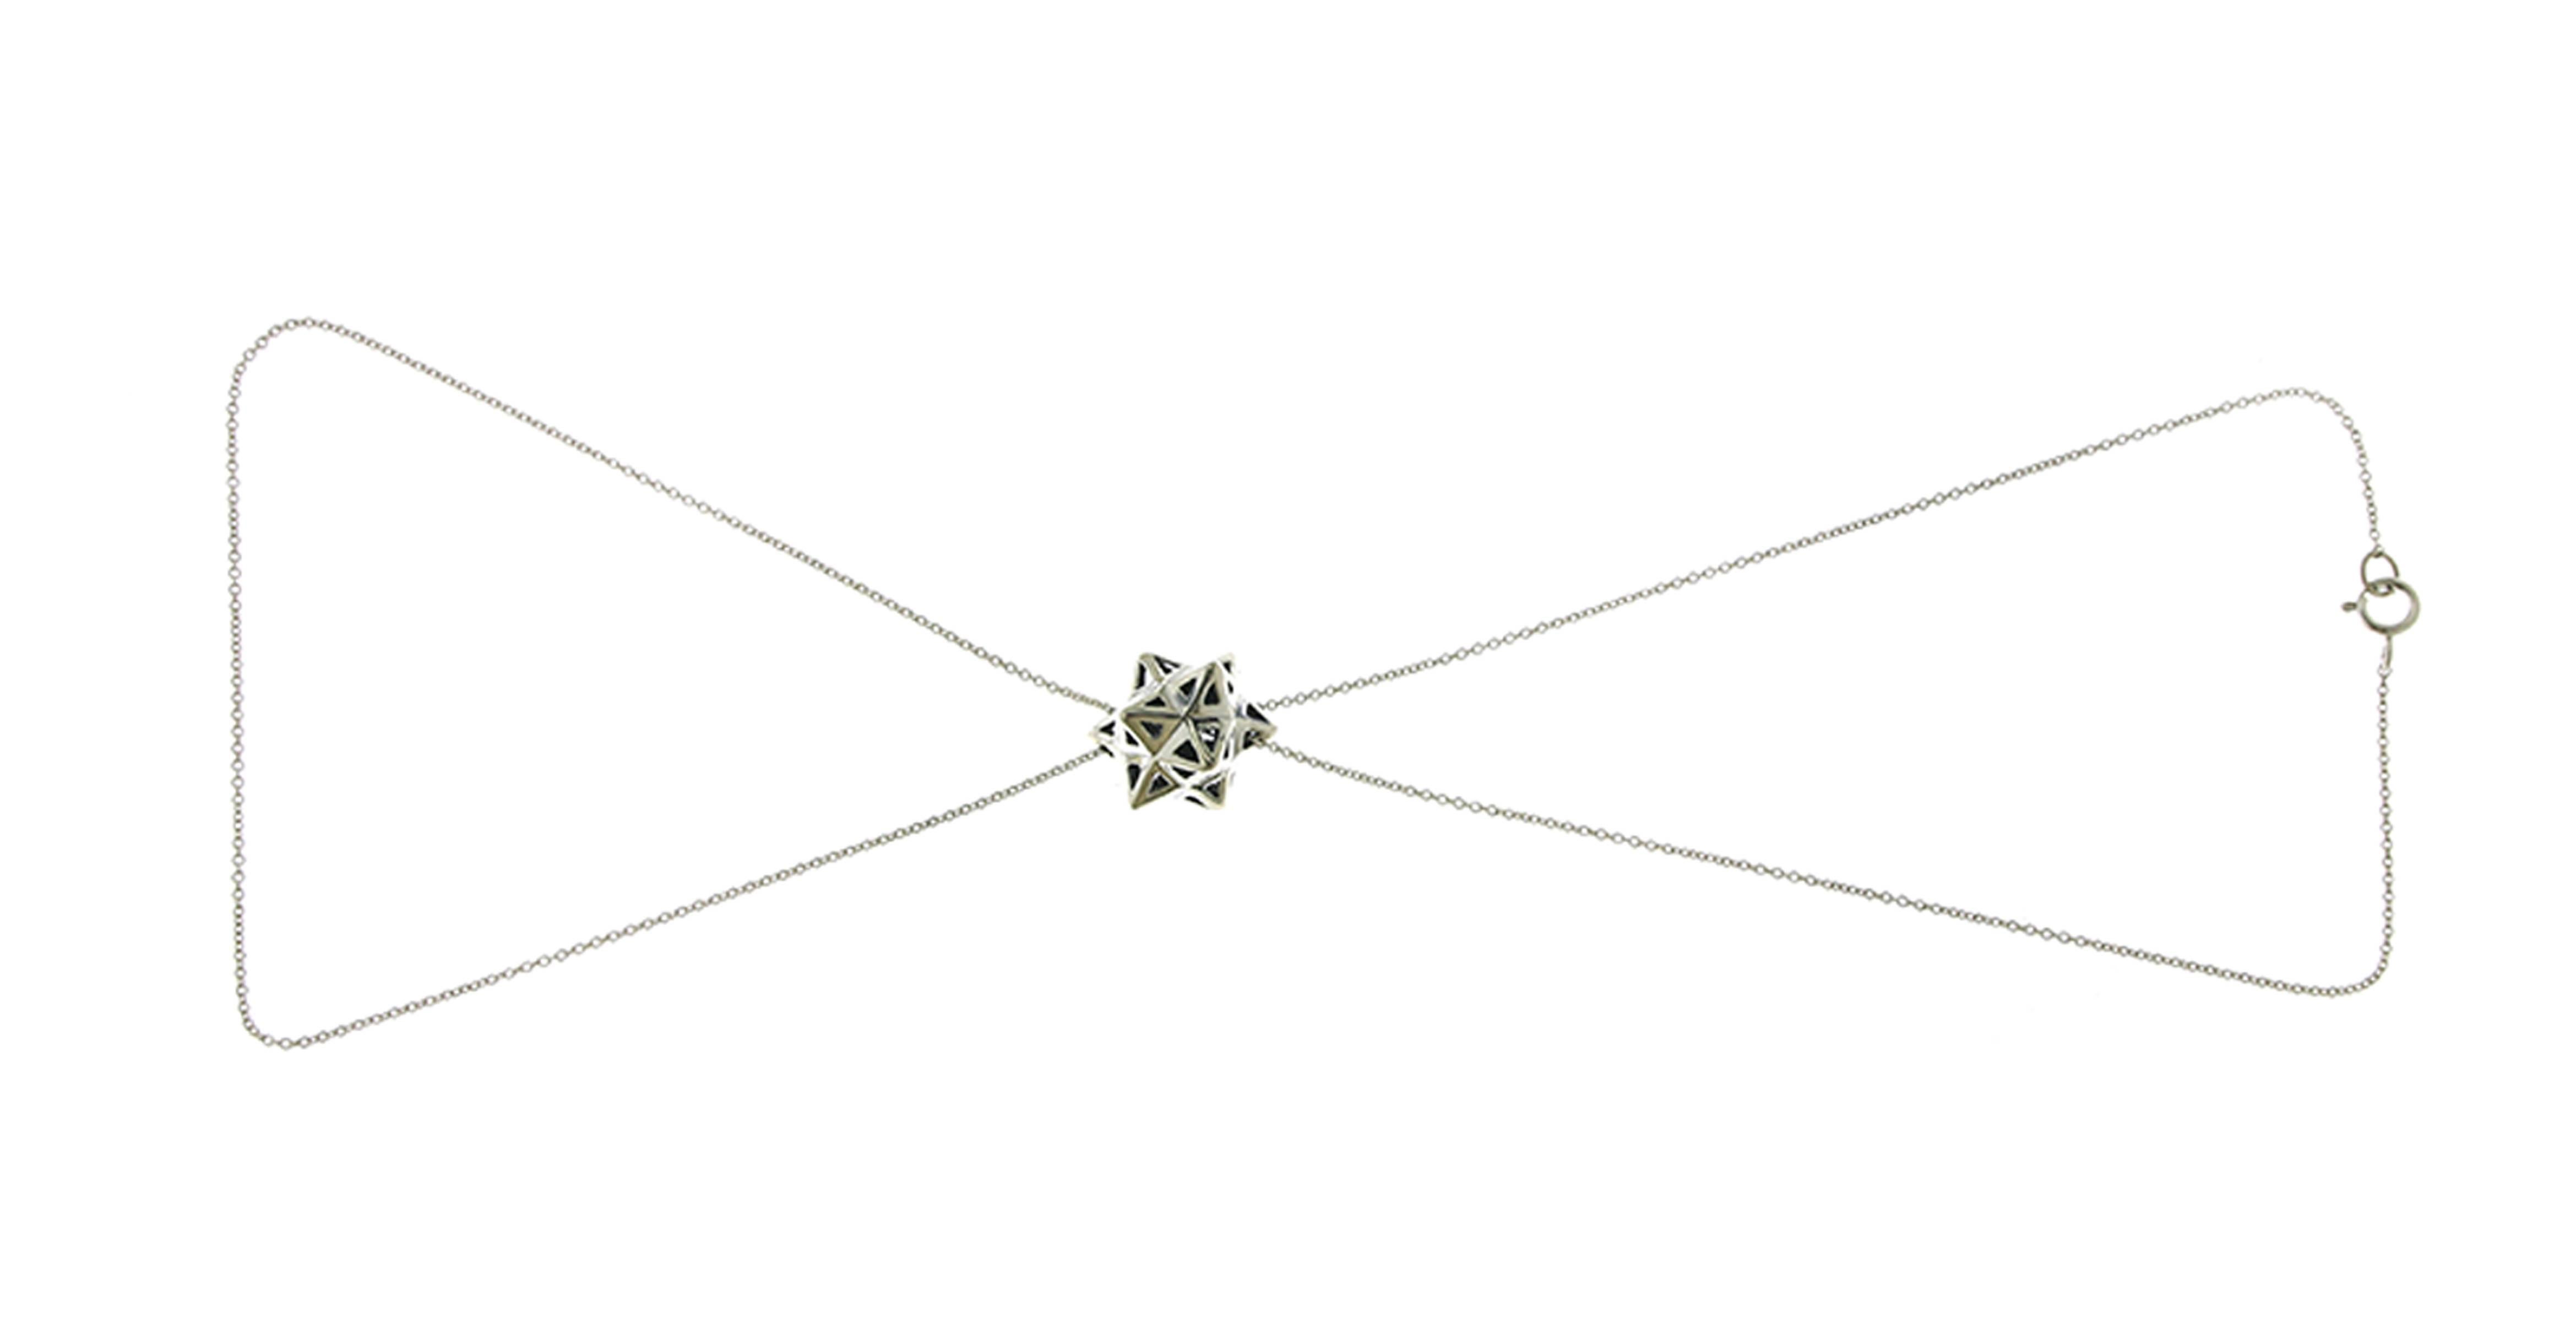 This limited edition, sterling silver Framed Mini Tetra necklace is an embodiment of monumental power and strength. This necklace features sacred geometric forms and evokes personal power. This necklace is part of designer John Brevard’s Verahedra